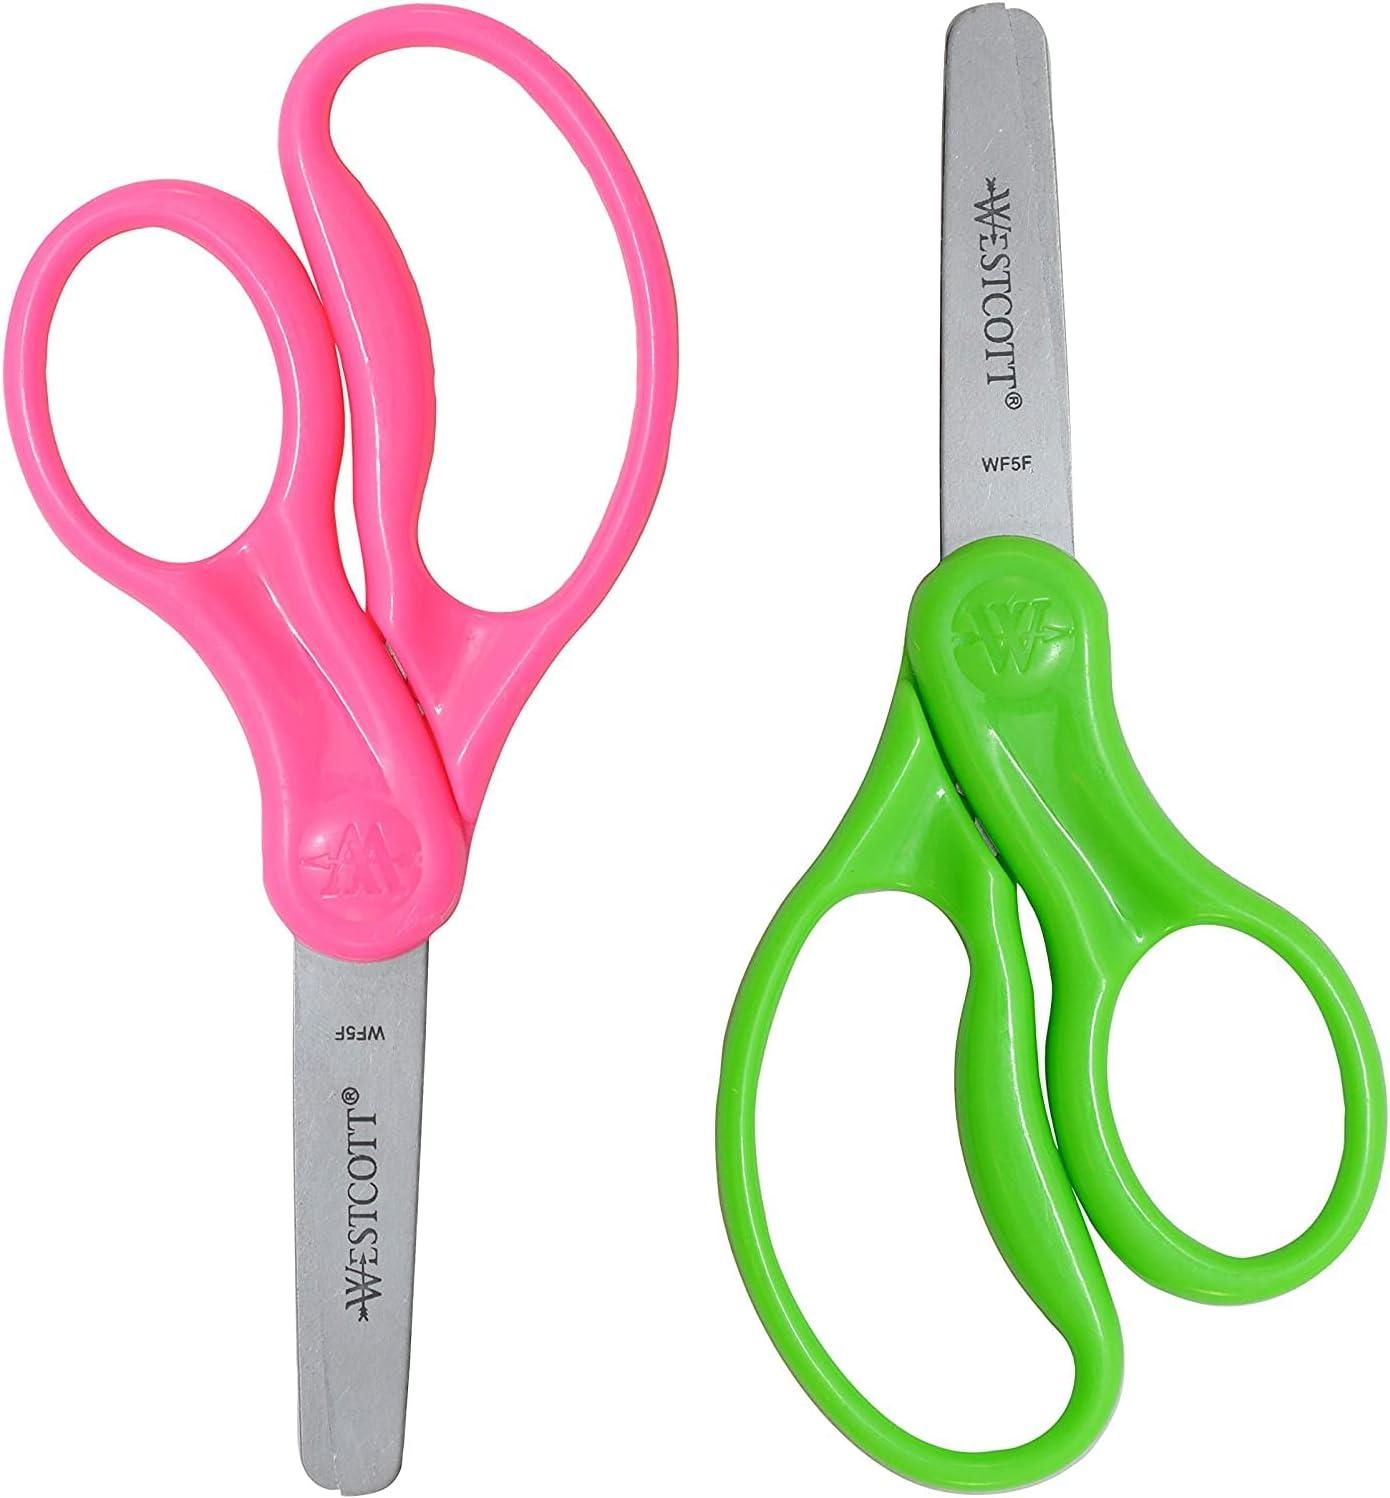 Westcott 13168 Right- and Left-Handed Scissors, Kids' Scissors, Ages 4-8,  5-Inch Blunt Tip, Assorted, 2 Pack